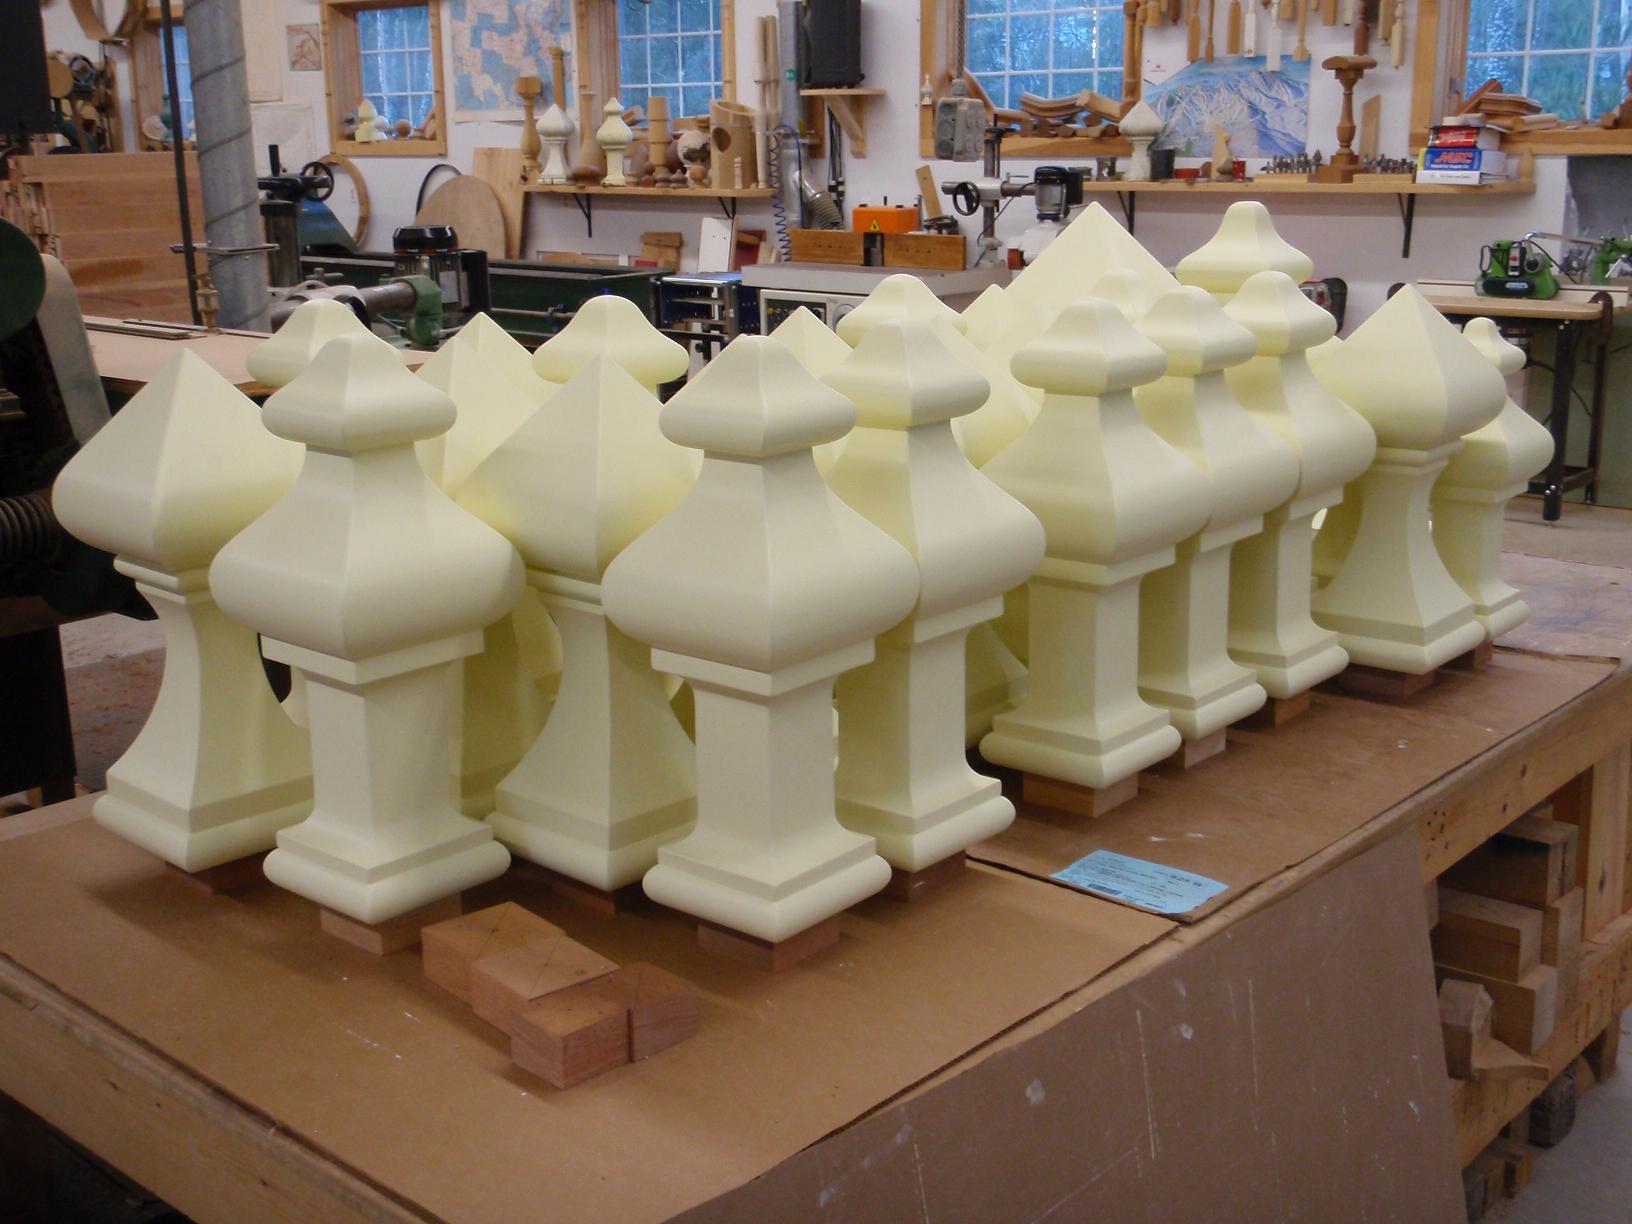 Hanson Woodturning. Square turnings. Kitchen Islands. Table Legs. Pedestal Bases. Table Bases. Large Finials.